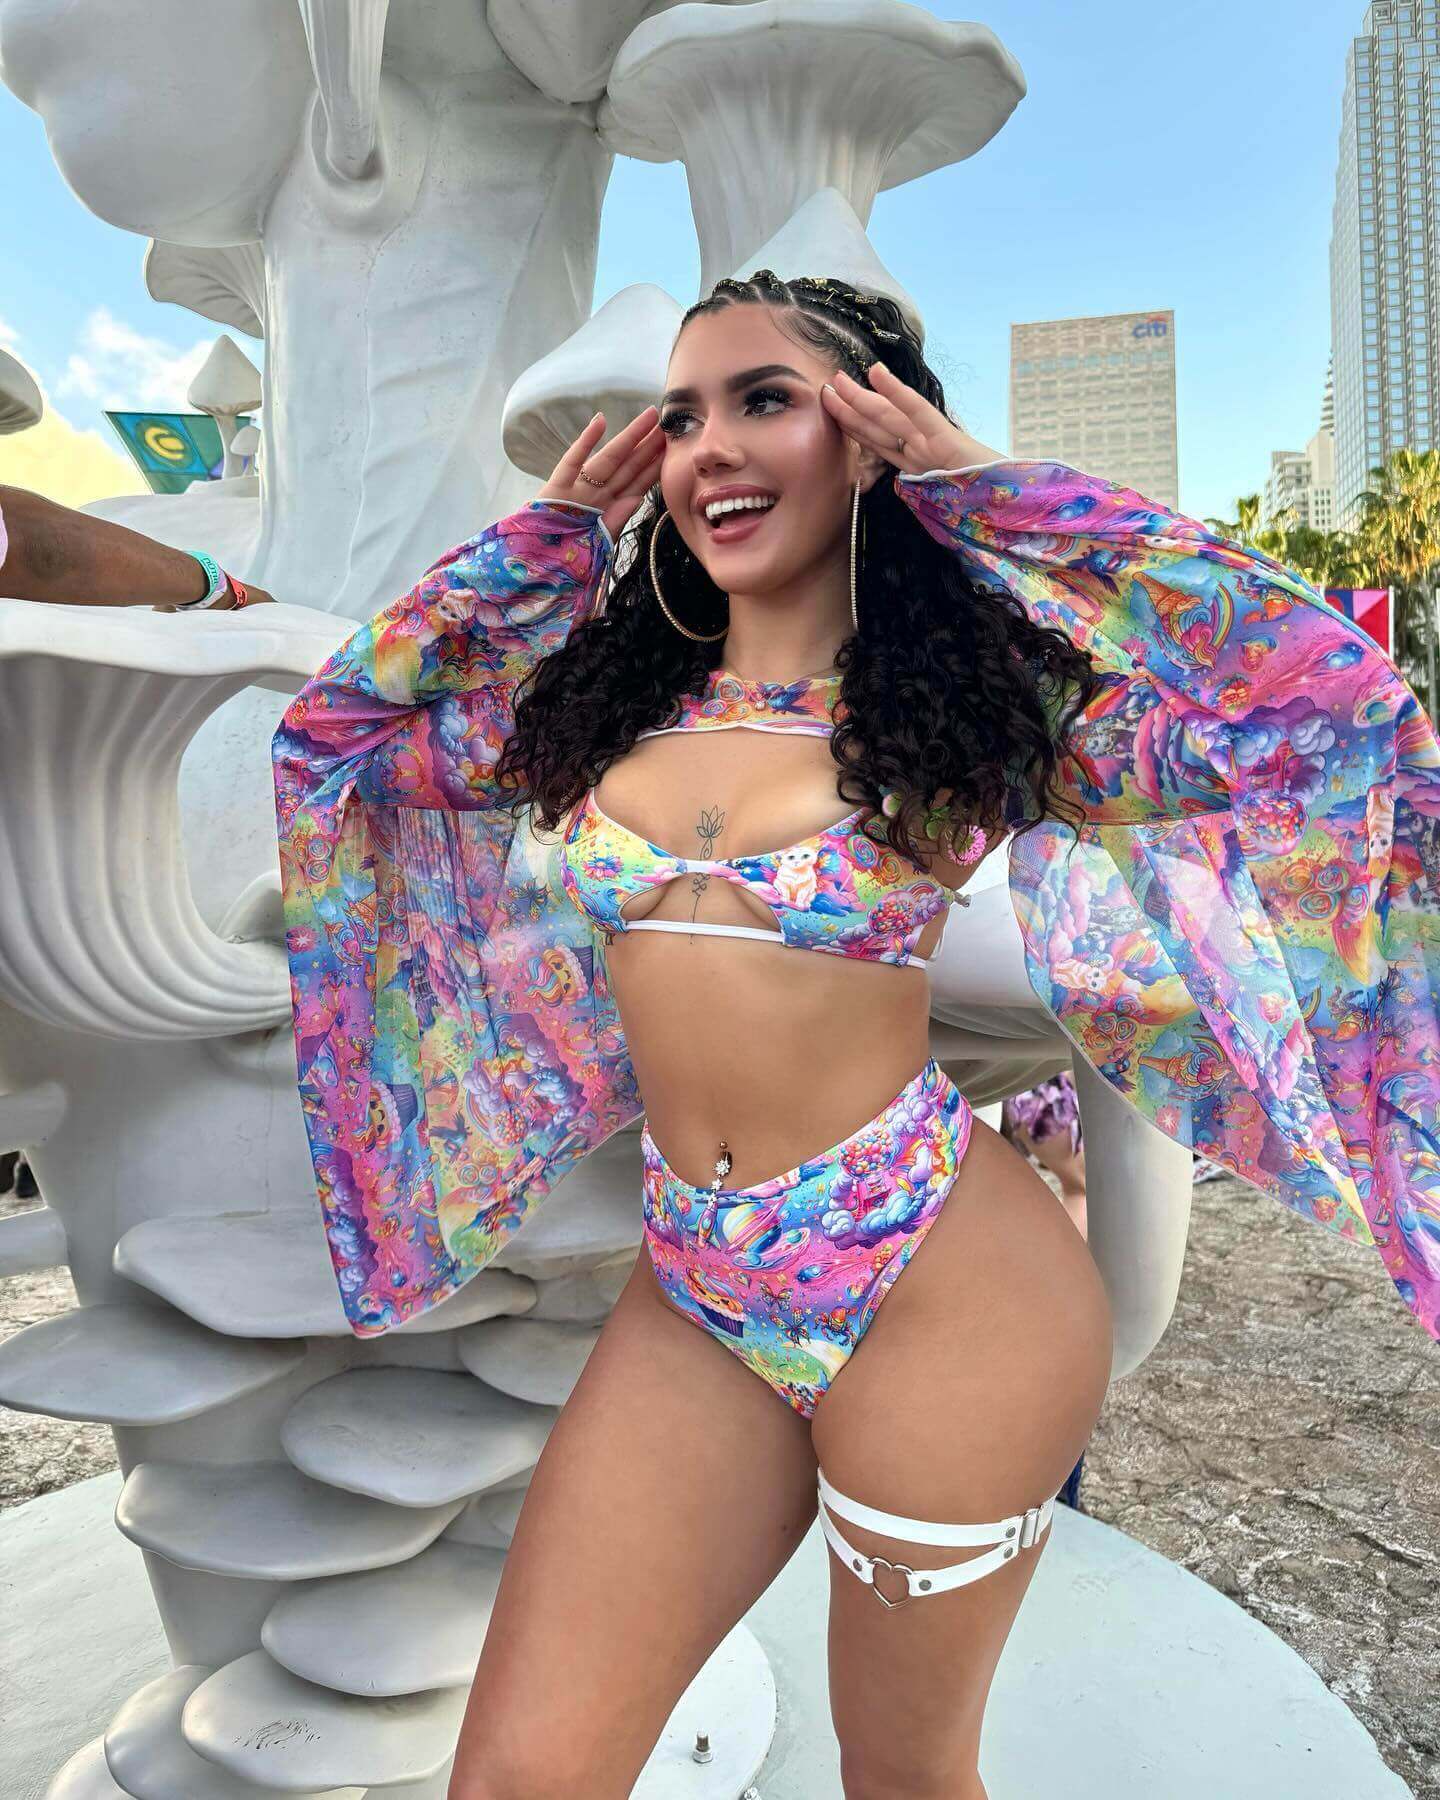 A woman wearing a rainbow bikini and matching bell sleeves. She is posing at a music festival.